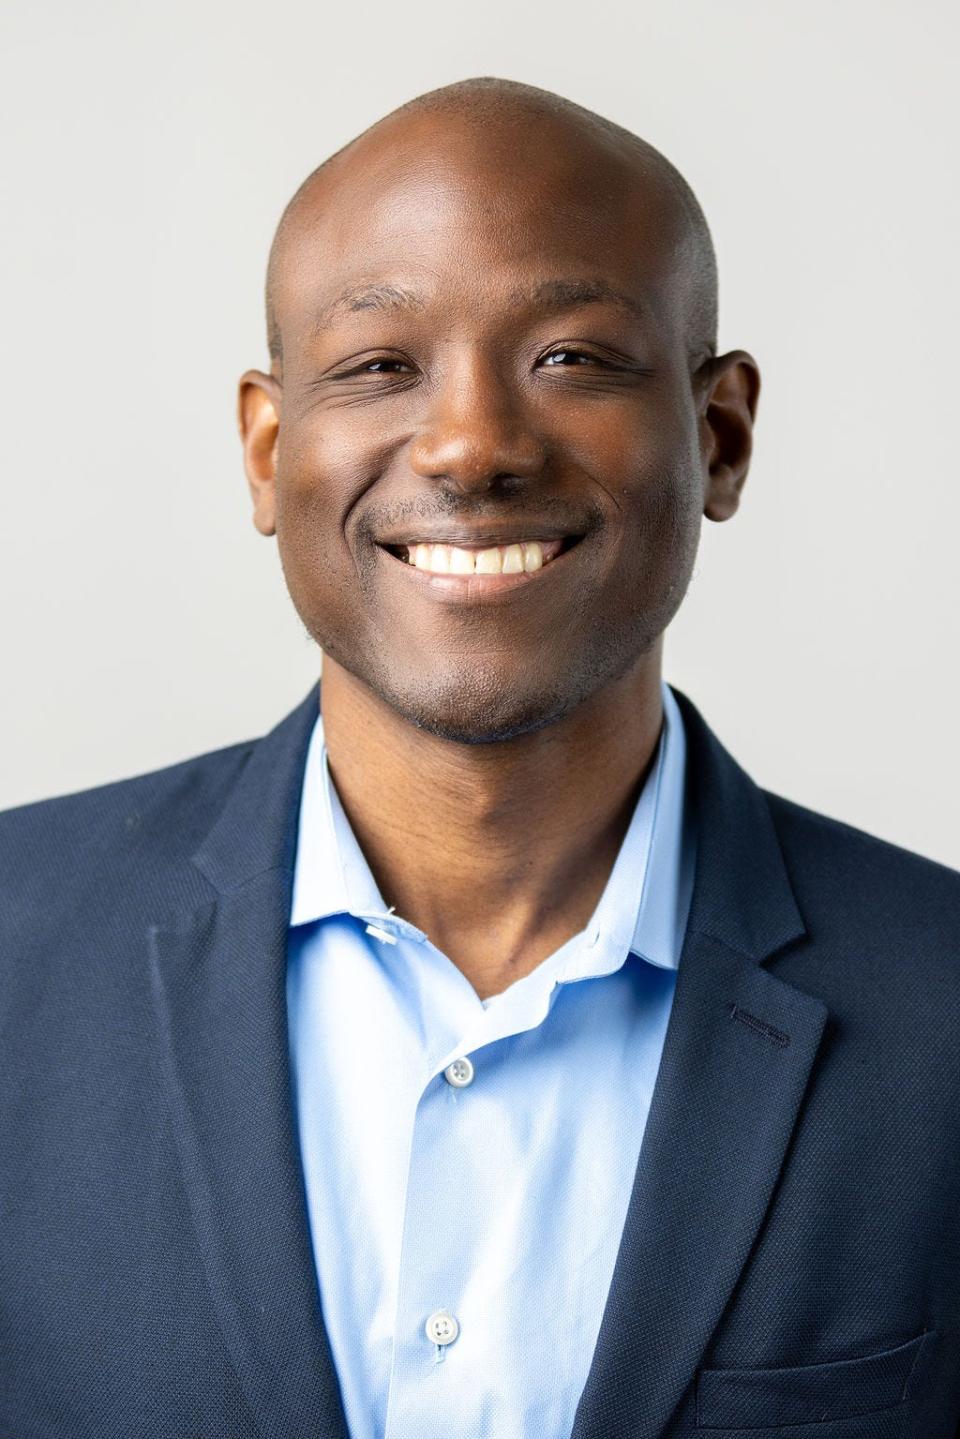 Chris Richardson served as a US diplomat in Nigeria, Nicaragua, Pakistan, and Spain. He currently is General Counsel and COO of BDV Solutions, LLC in Greenville.